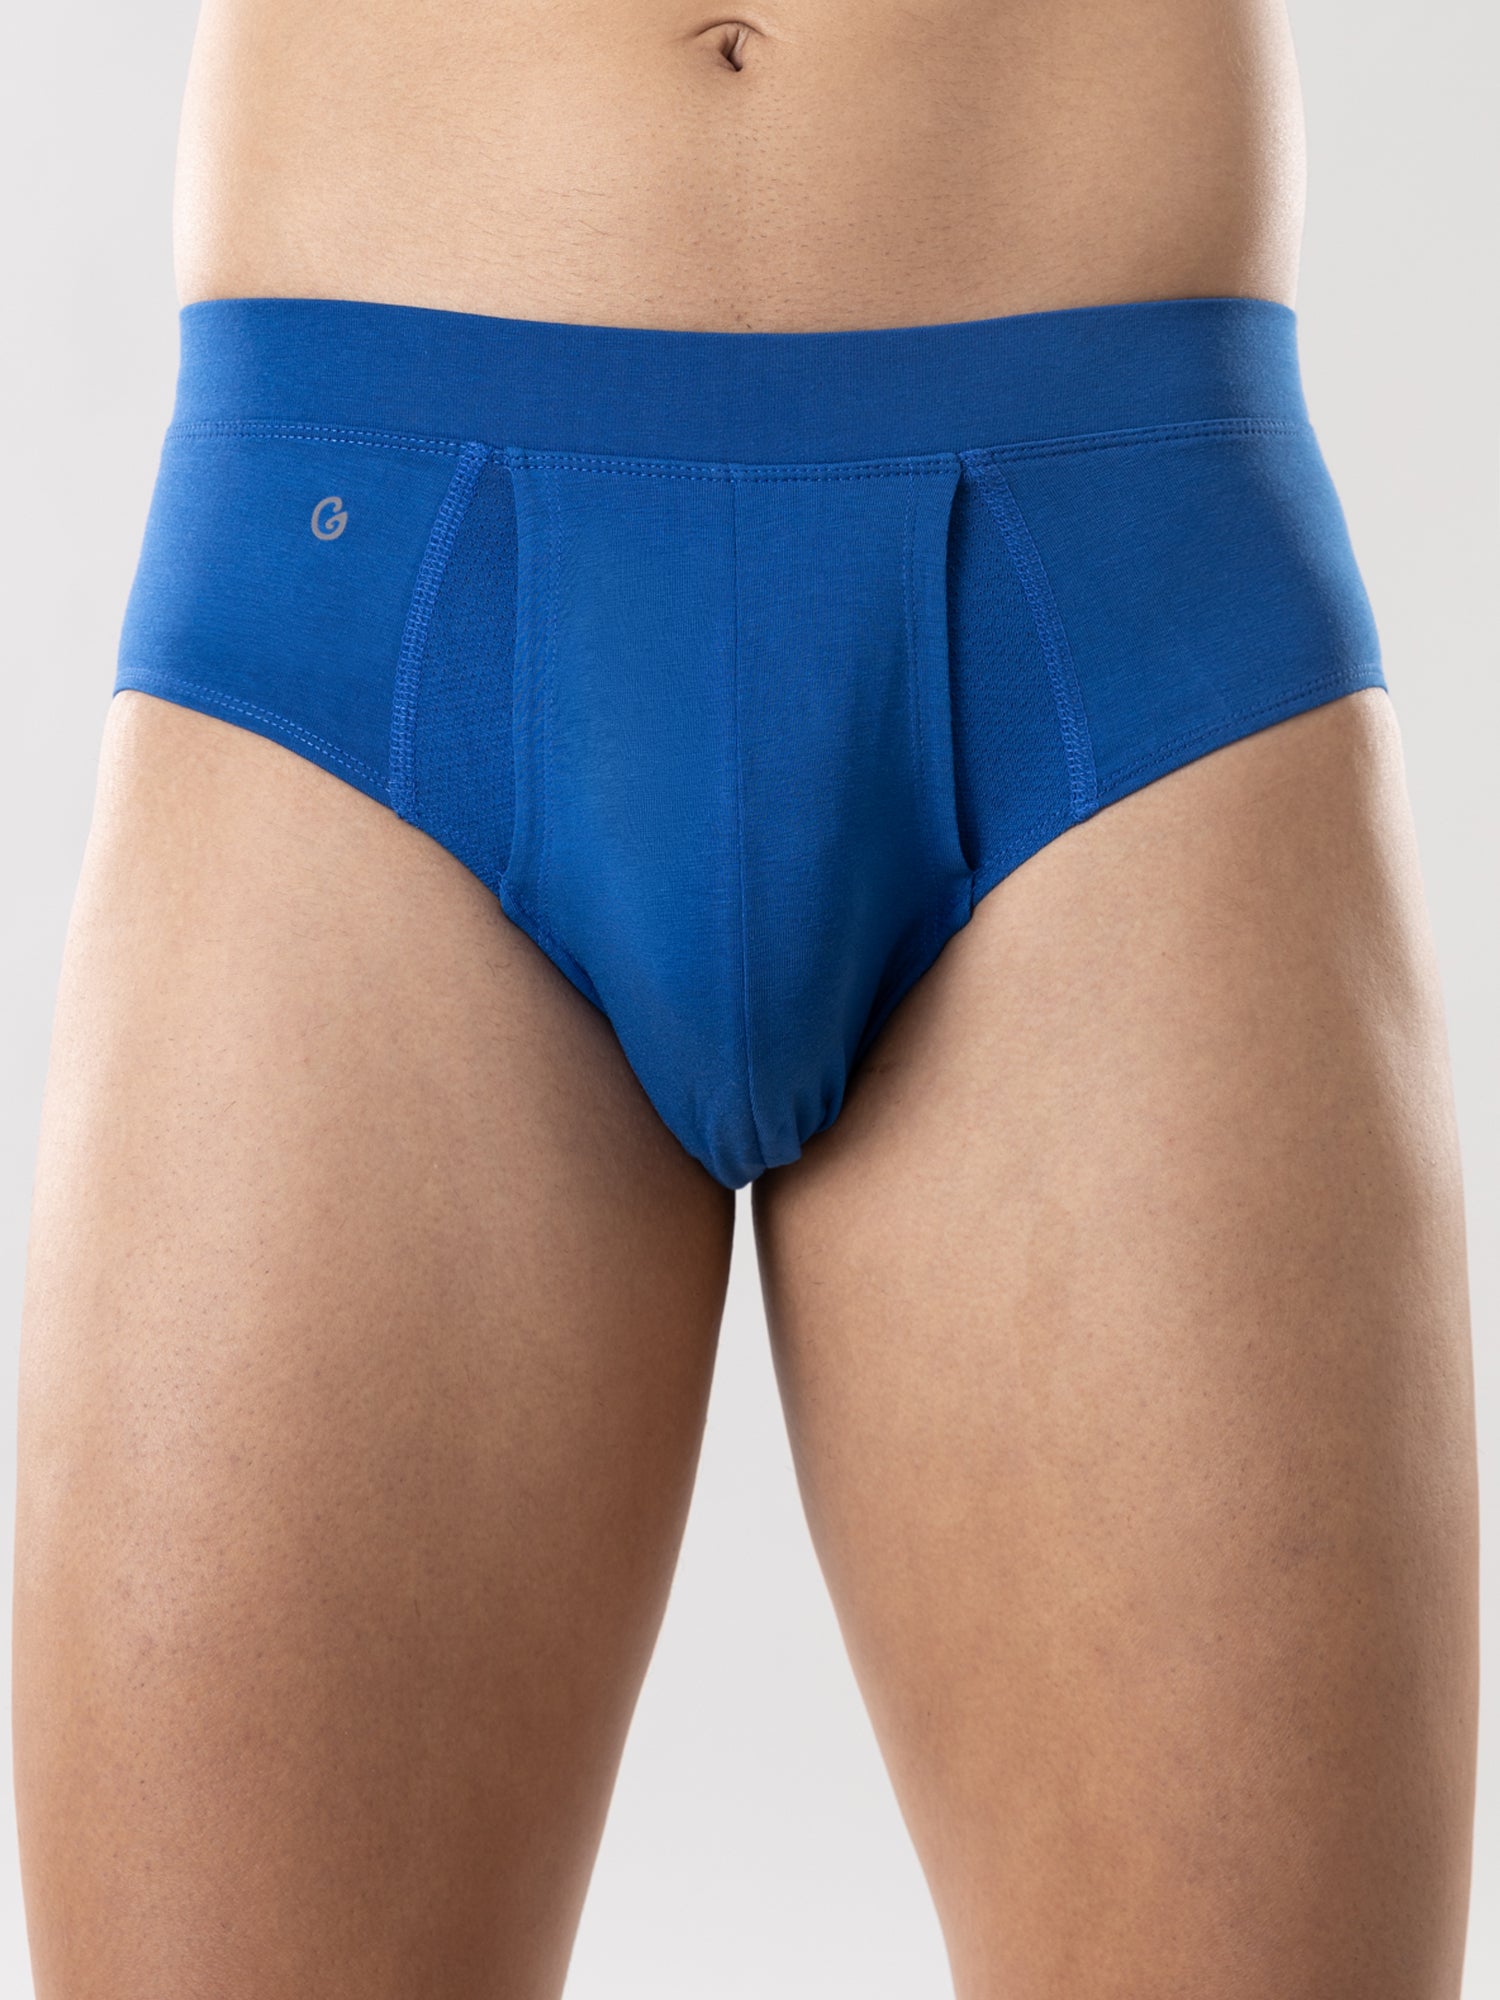 Anti Odor Cotton Tencel Cooling Brief - Royal Blue – Gloot